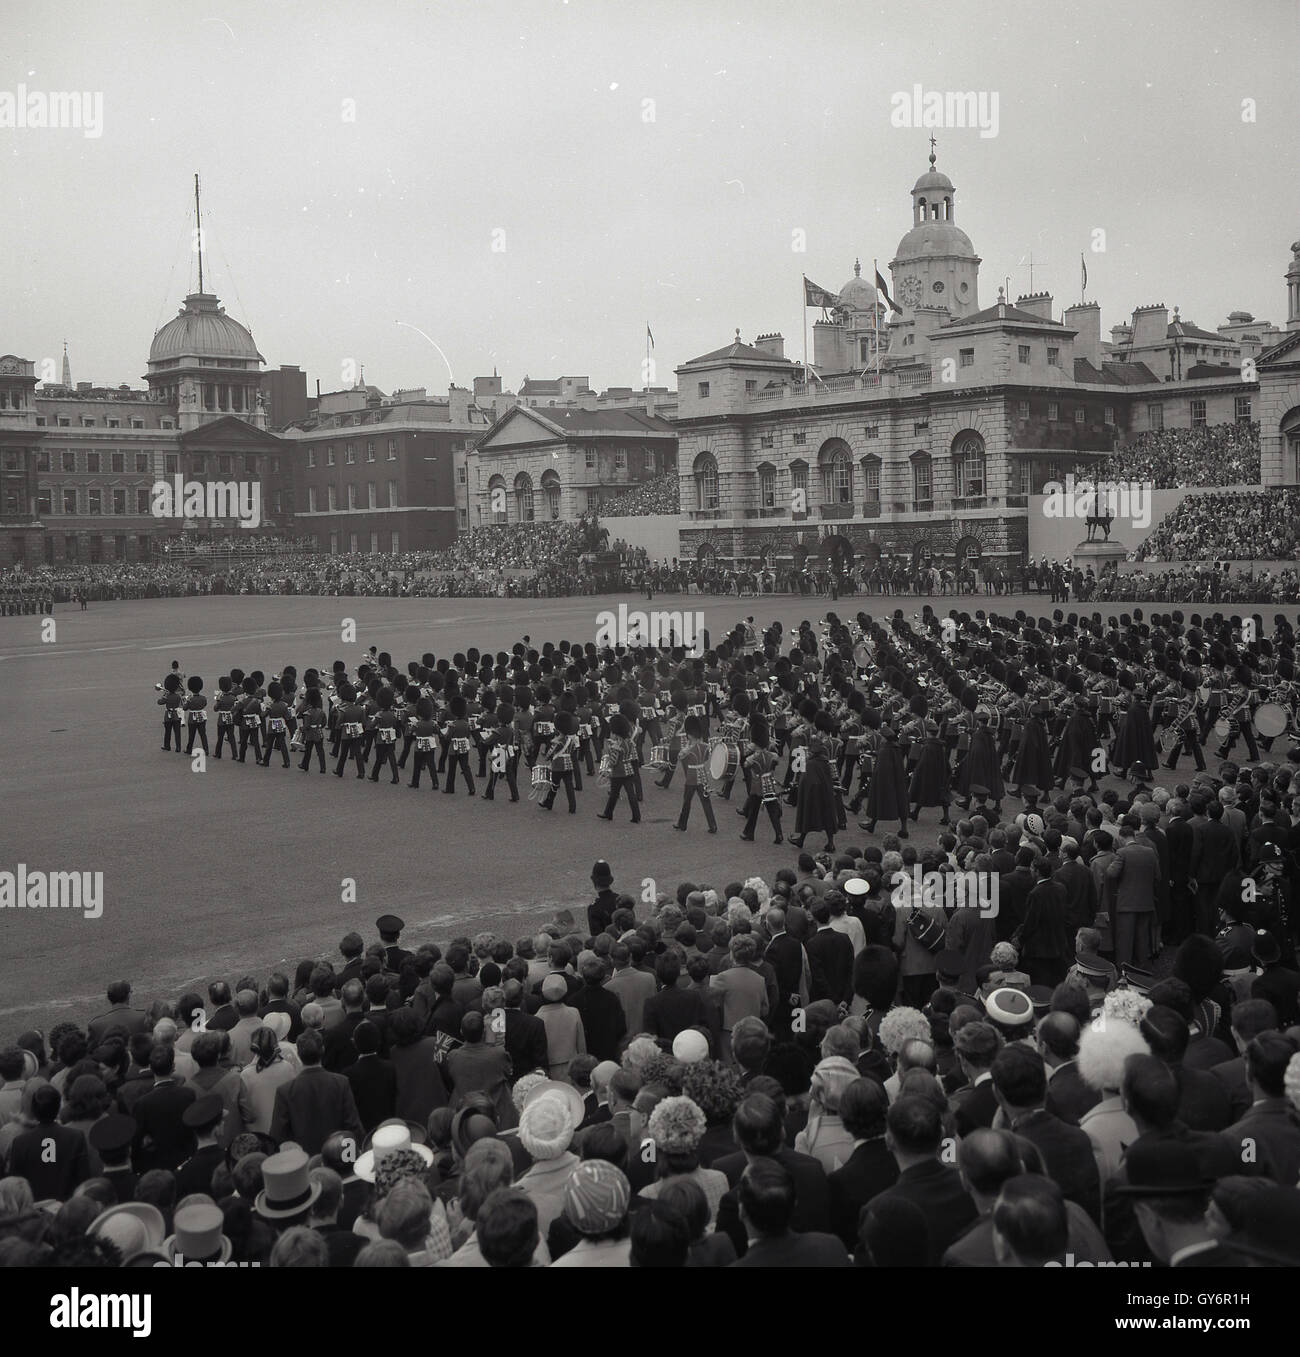 1950s, historical. Military ceremony, Trooping the Colour. celebrating the Queen of England's birthday, Horse guards Parade, Whitehall, London, UK. Stock Photo